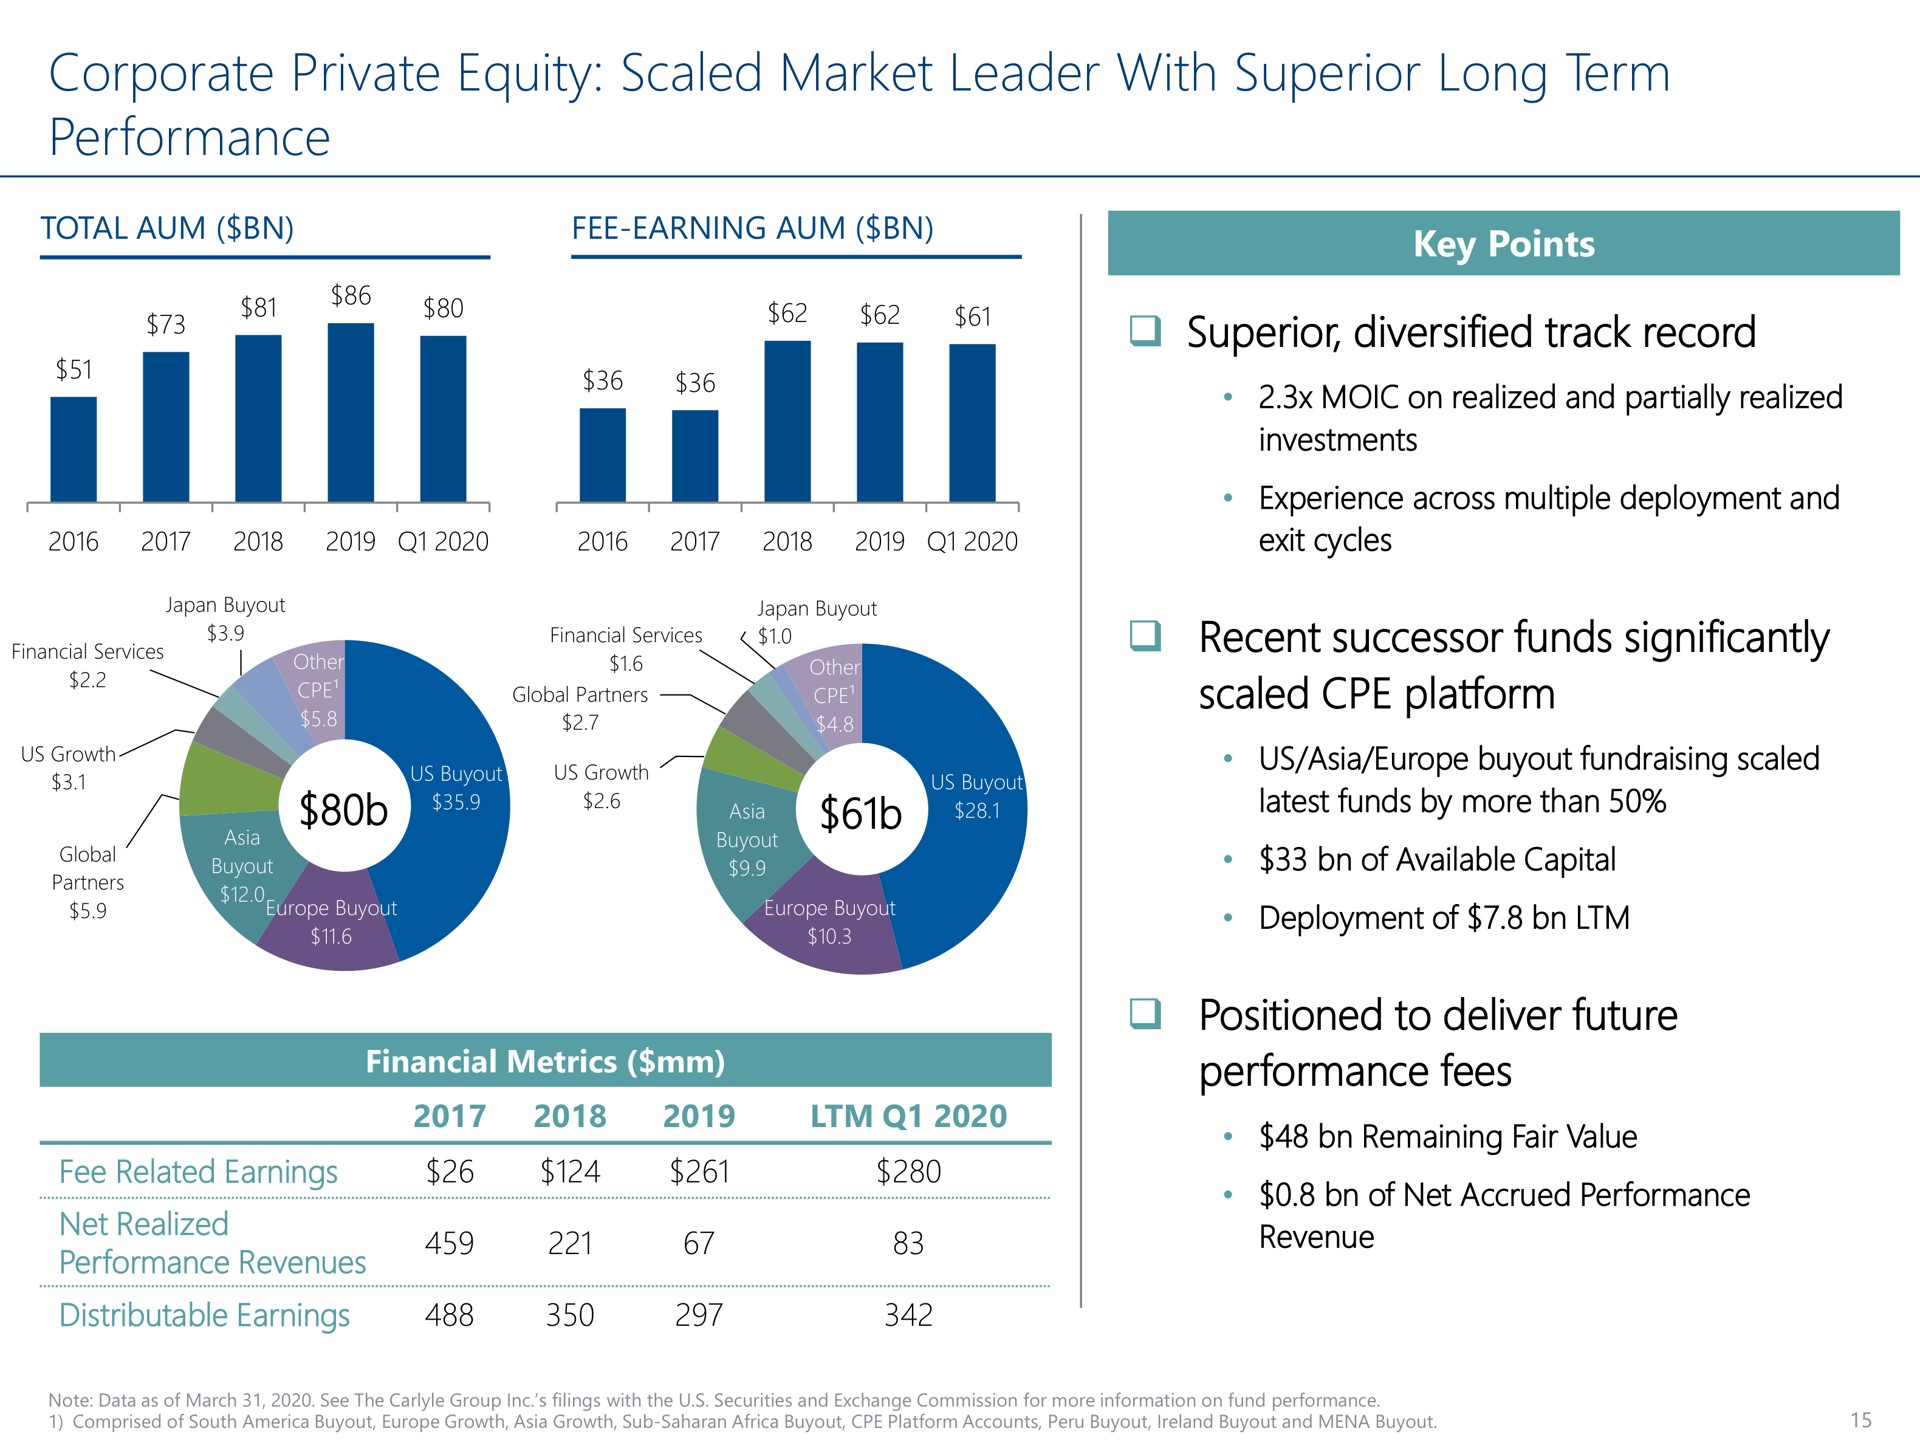 corporate private equity scaled market leader with superior long term performance superior diversified track record recent successor funds significantly scaled platform positioned to deliver future performance fees suum services fee related earnings net | Carlyle